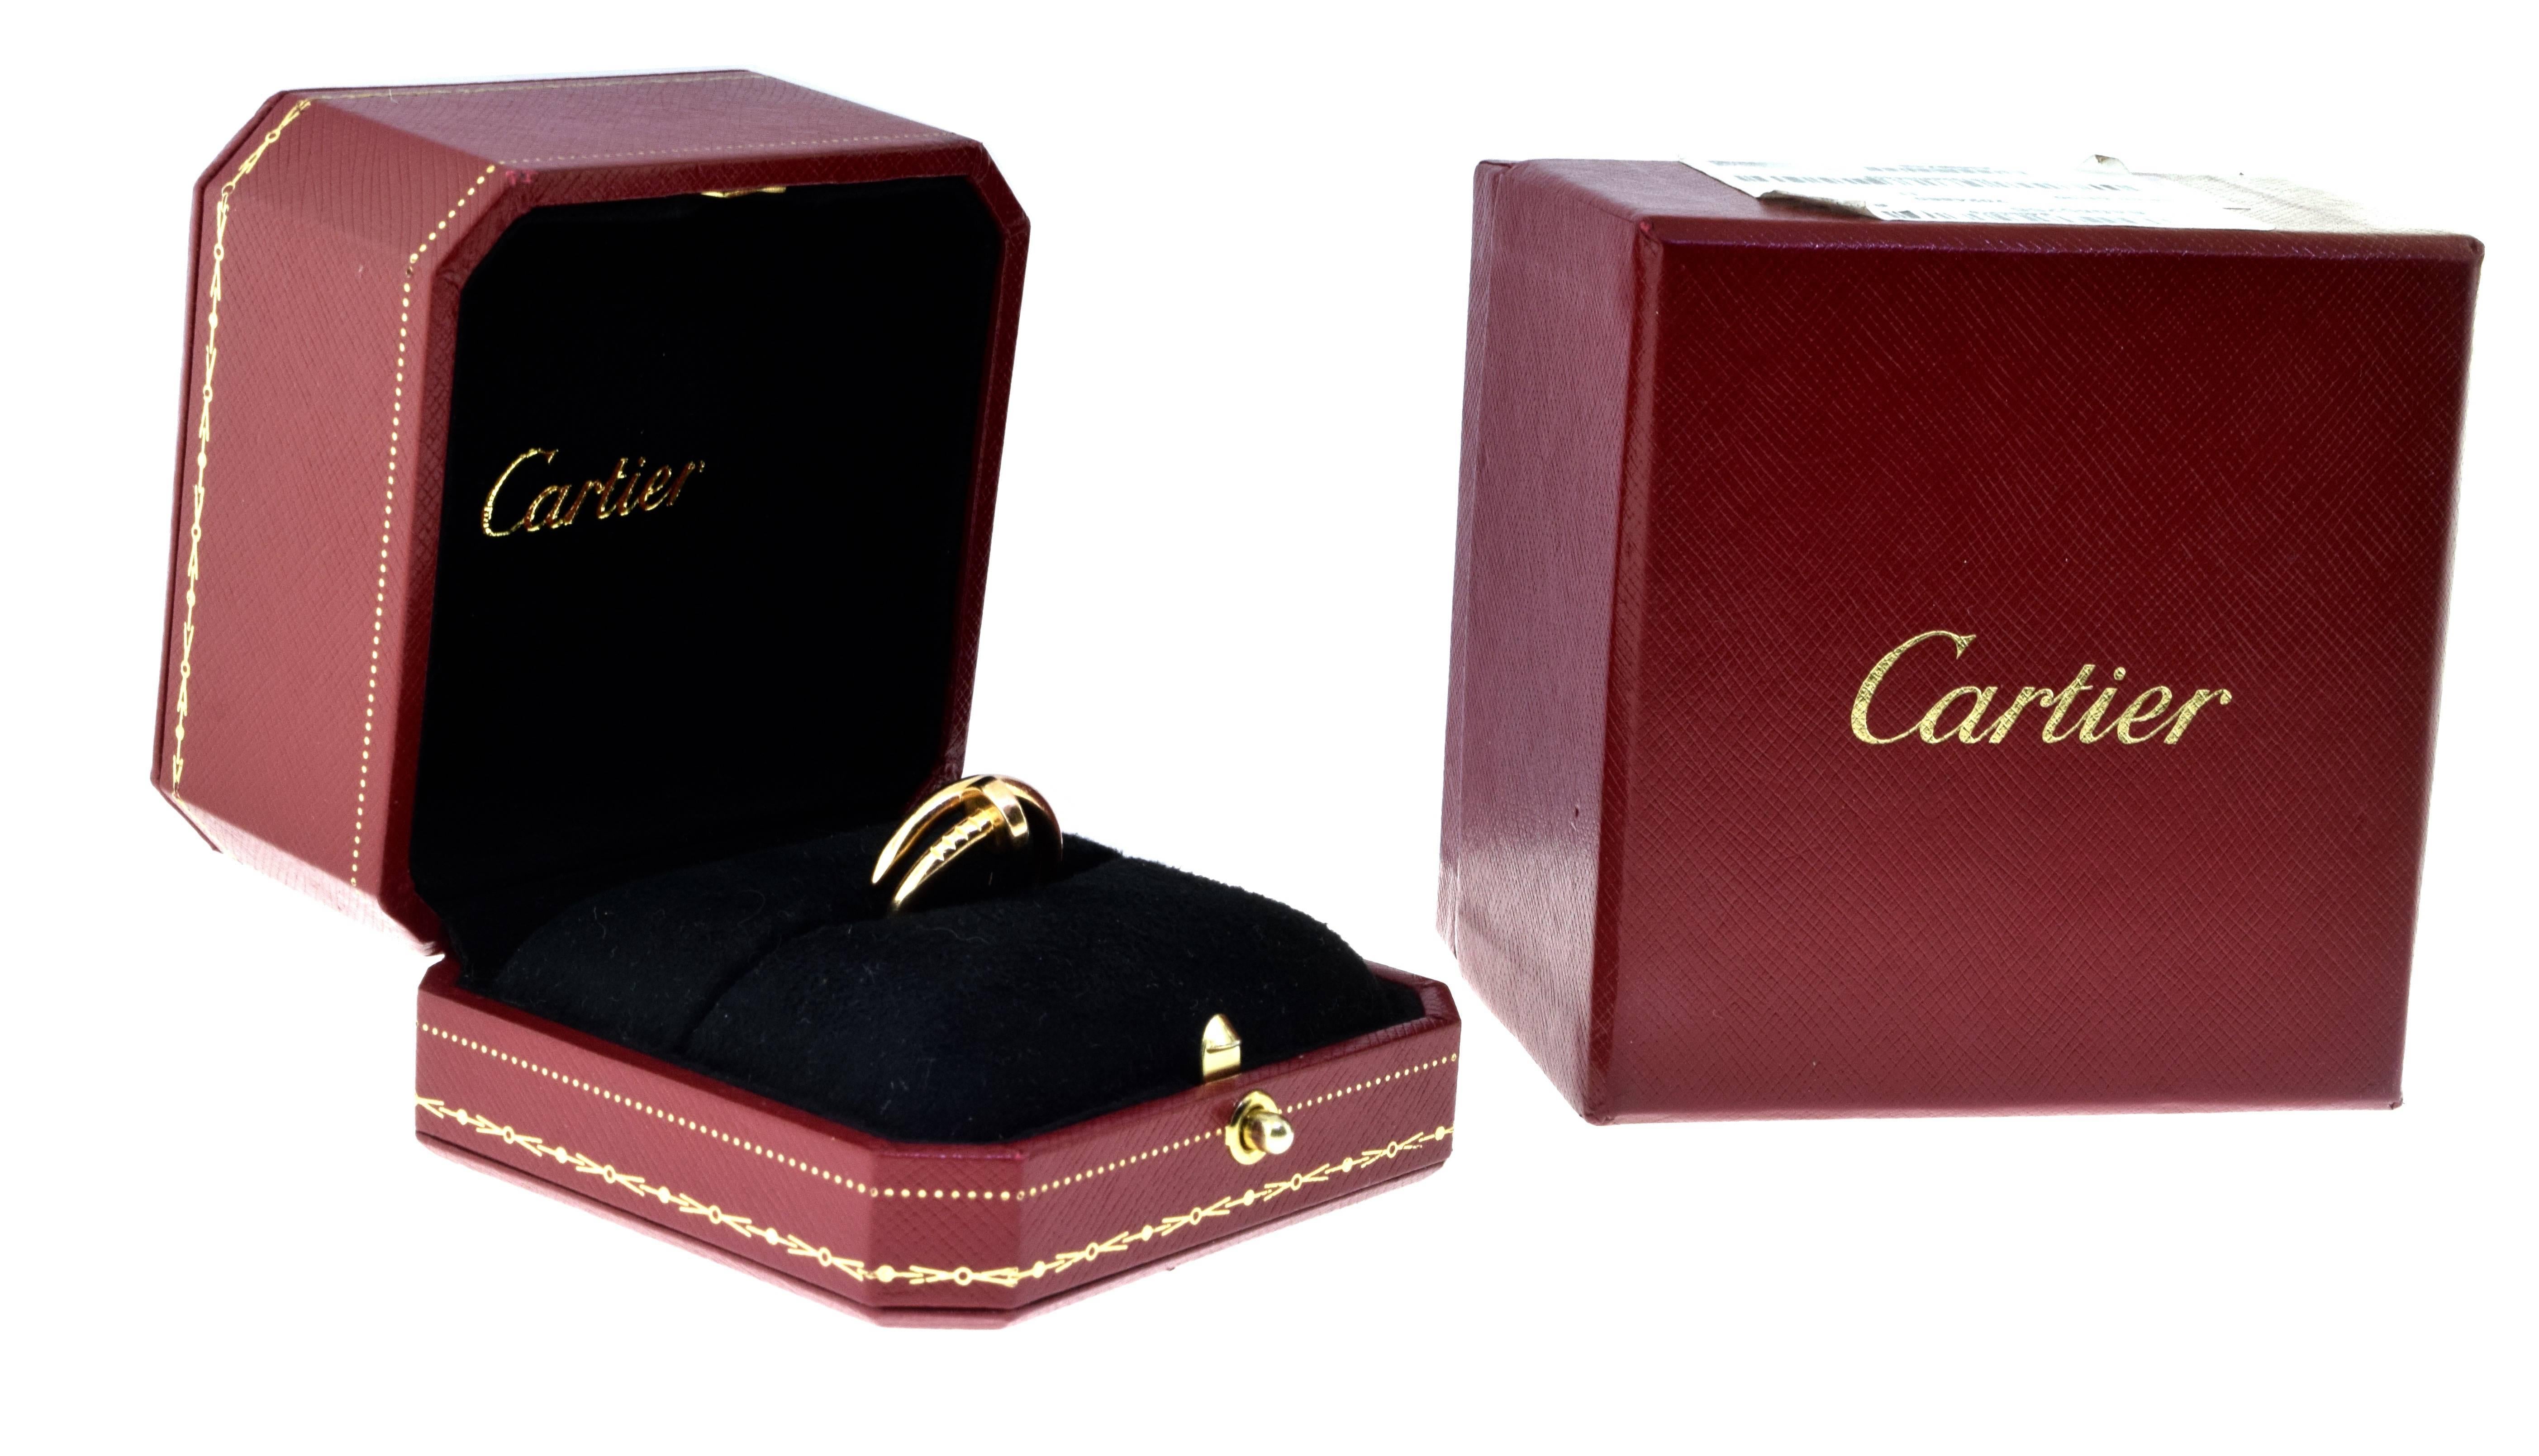 From Cartier's Juste Un Clou Collection (includes Certificate of Authenticity & Manufacturer's Box)

Metal: 18k Rose Gold
Ring Size: 55 (euro) ; 7.5 (US)
Total Item Weight (grams): 8.0
Hallmark: Cartier 55 Au750 Serial No. 
Includes: Certificate